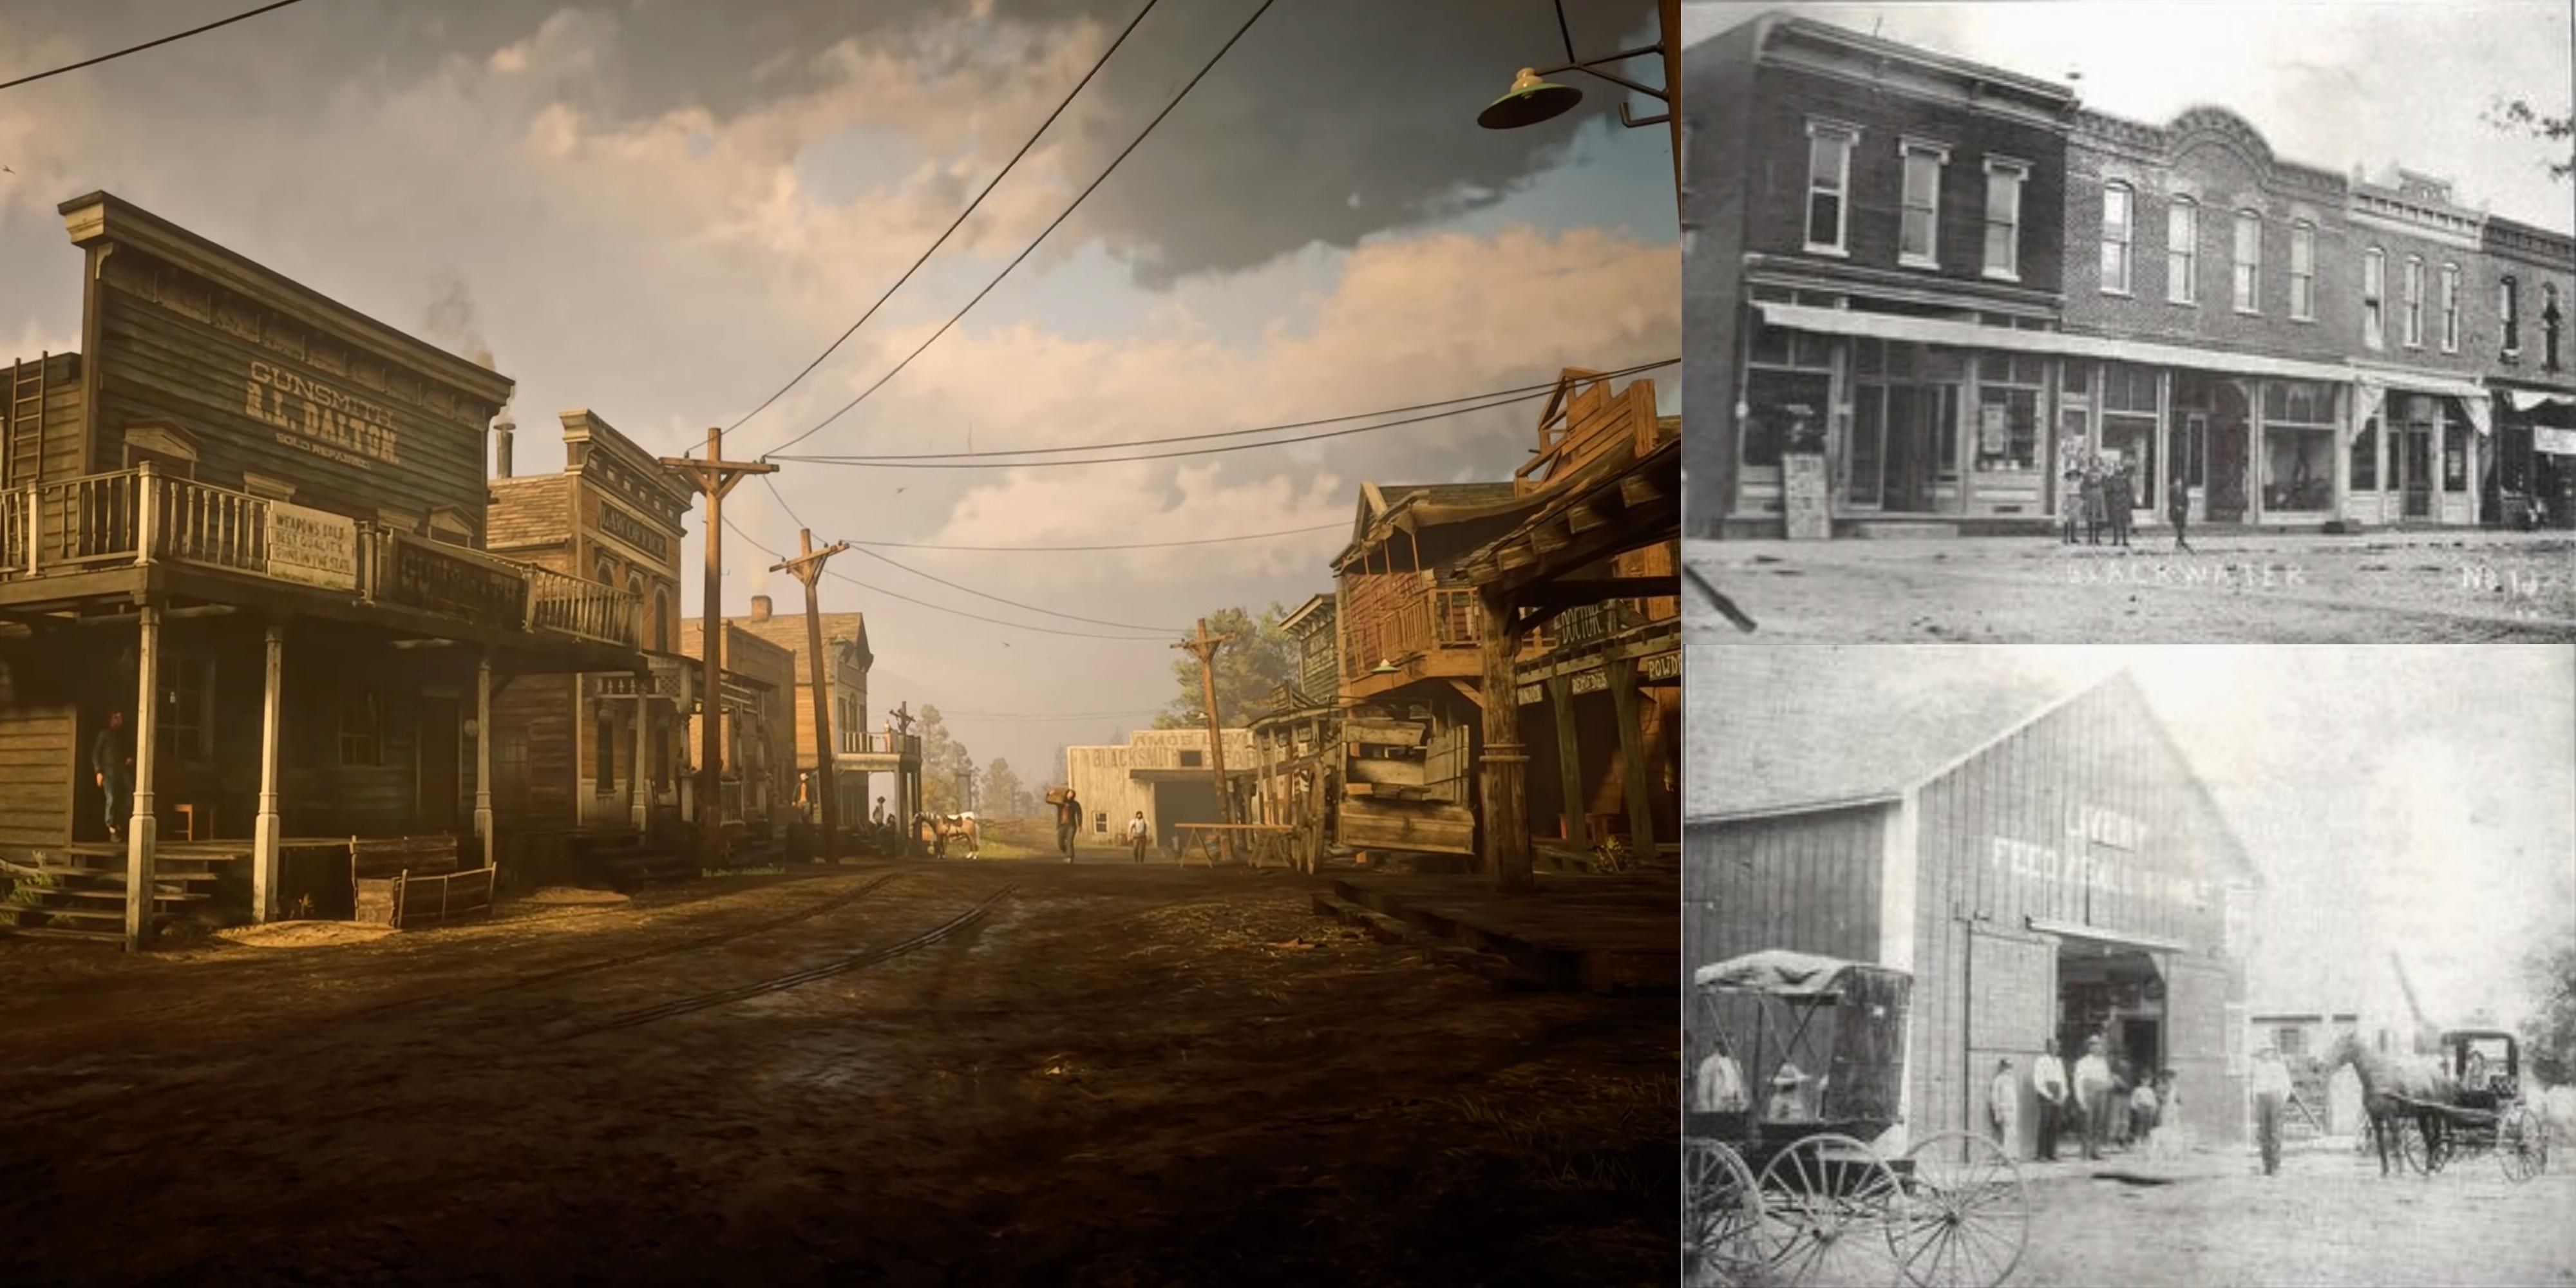 Side by side Red Dead Redemption 2's Blackwater and real life Blackwater